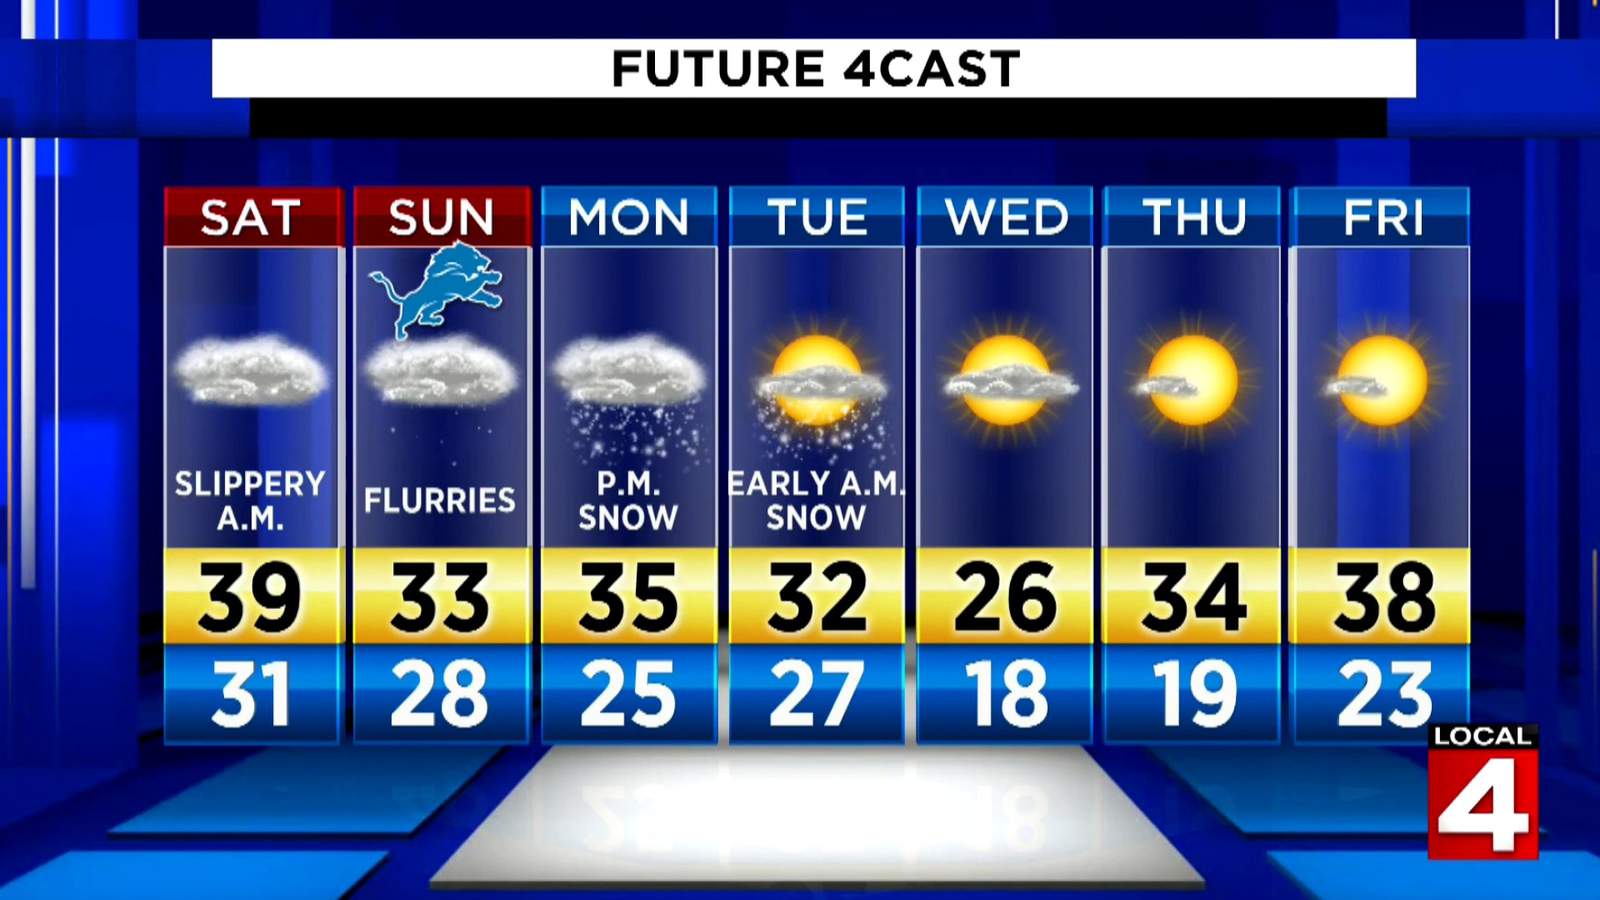 Metro Detroit weather: Becoming colder Saturday evening and tonight, flurries